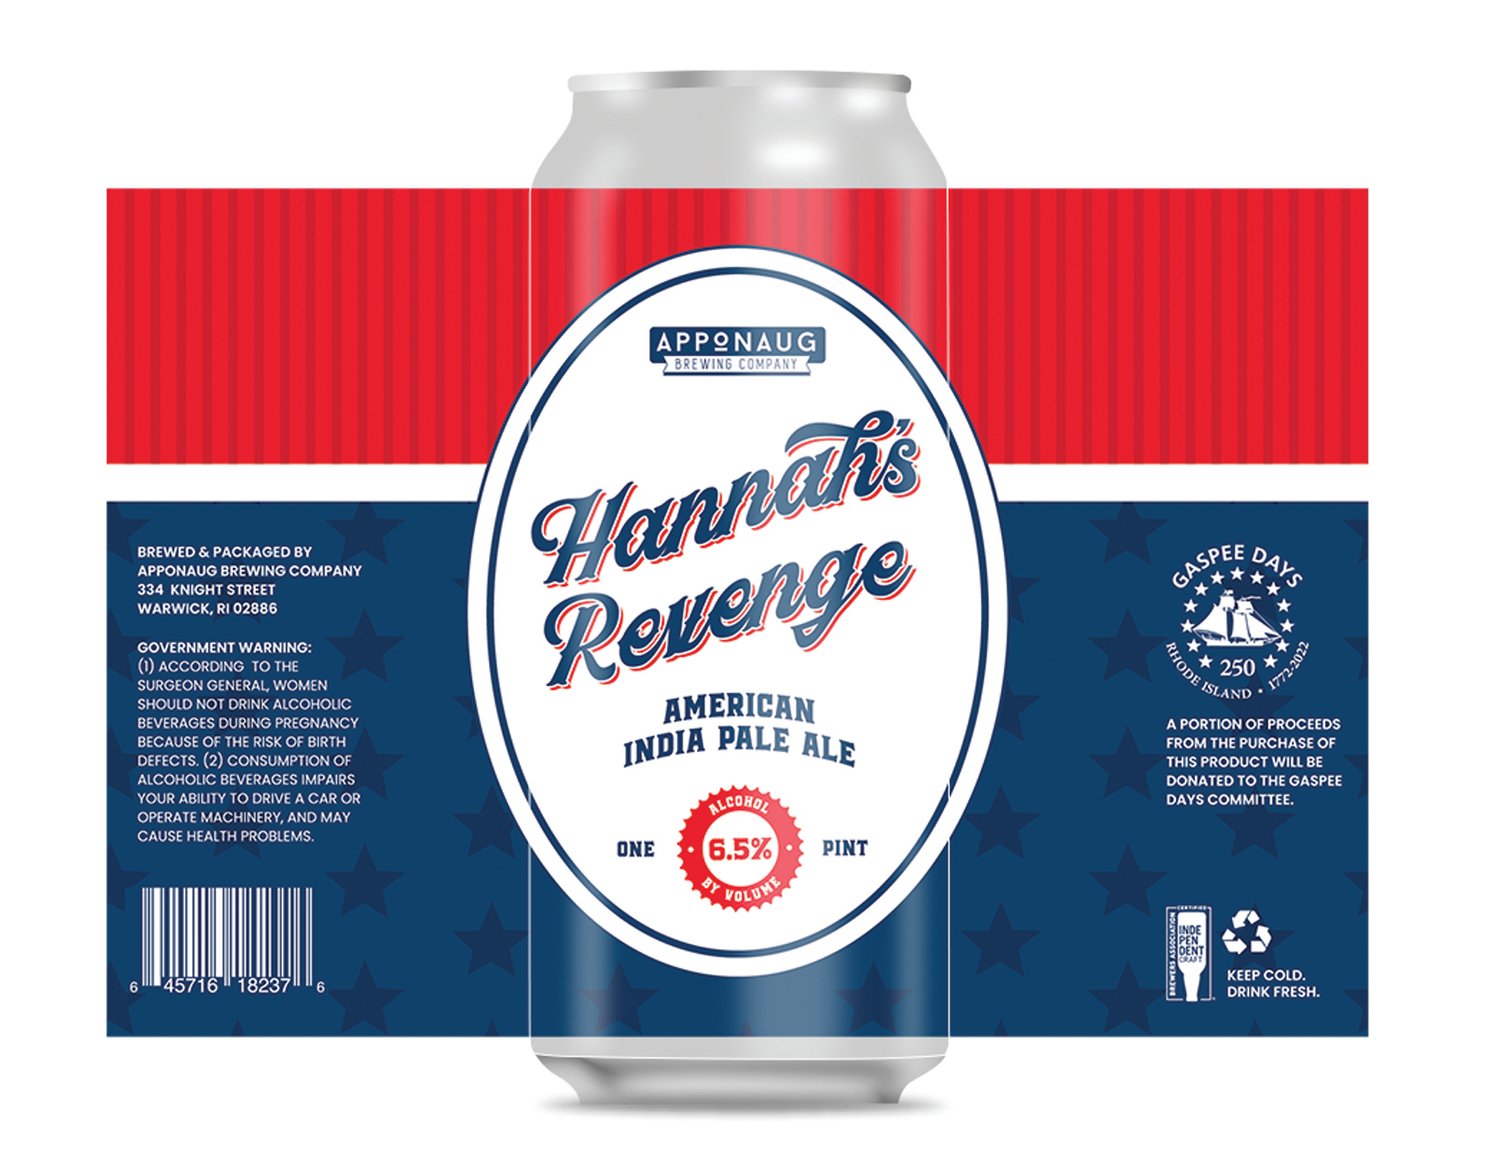 HANNAH’S BEER: Apponaug’s “Hannah’s Revenge,” will be available Thursday, May 5, on-tap at the brewery’s bar.